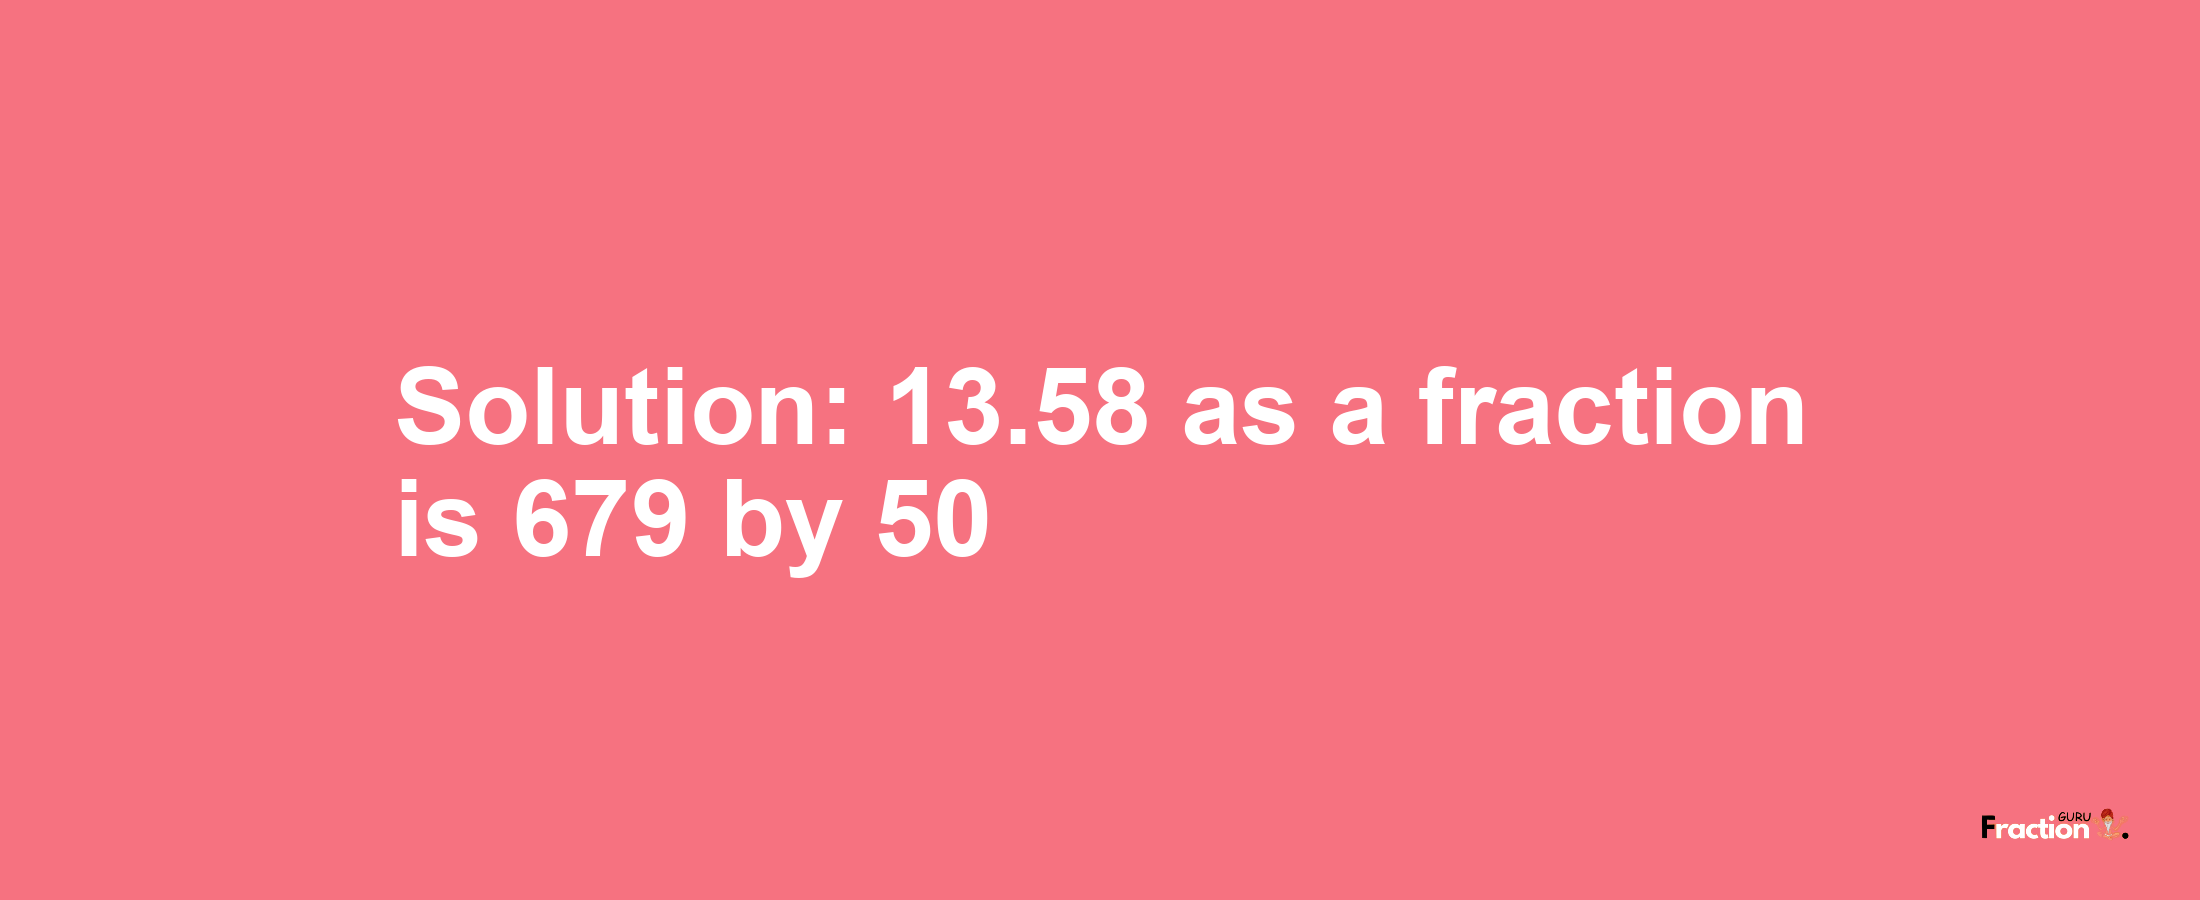 Solution:13.58 as a fraction is 679/50